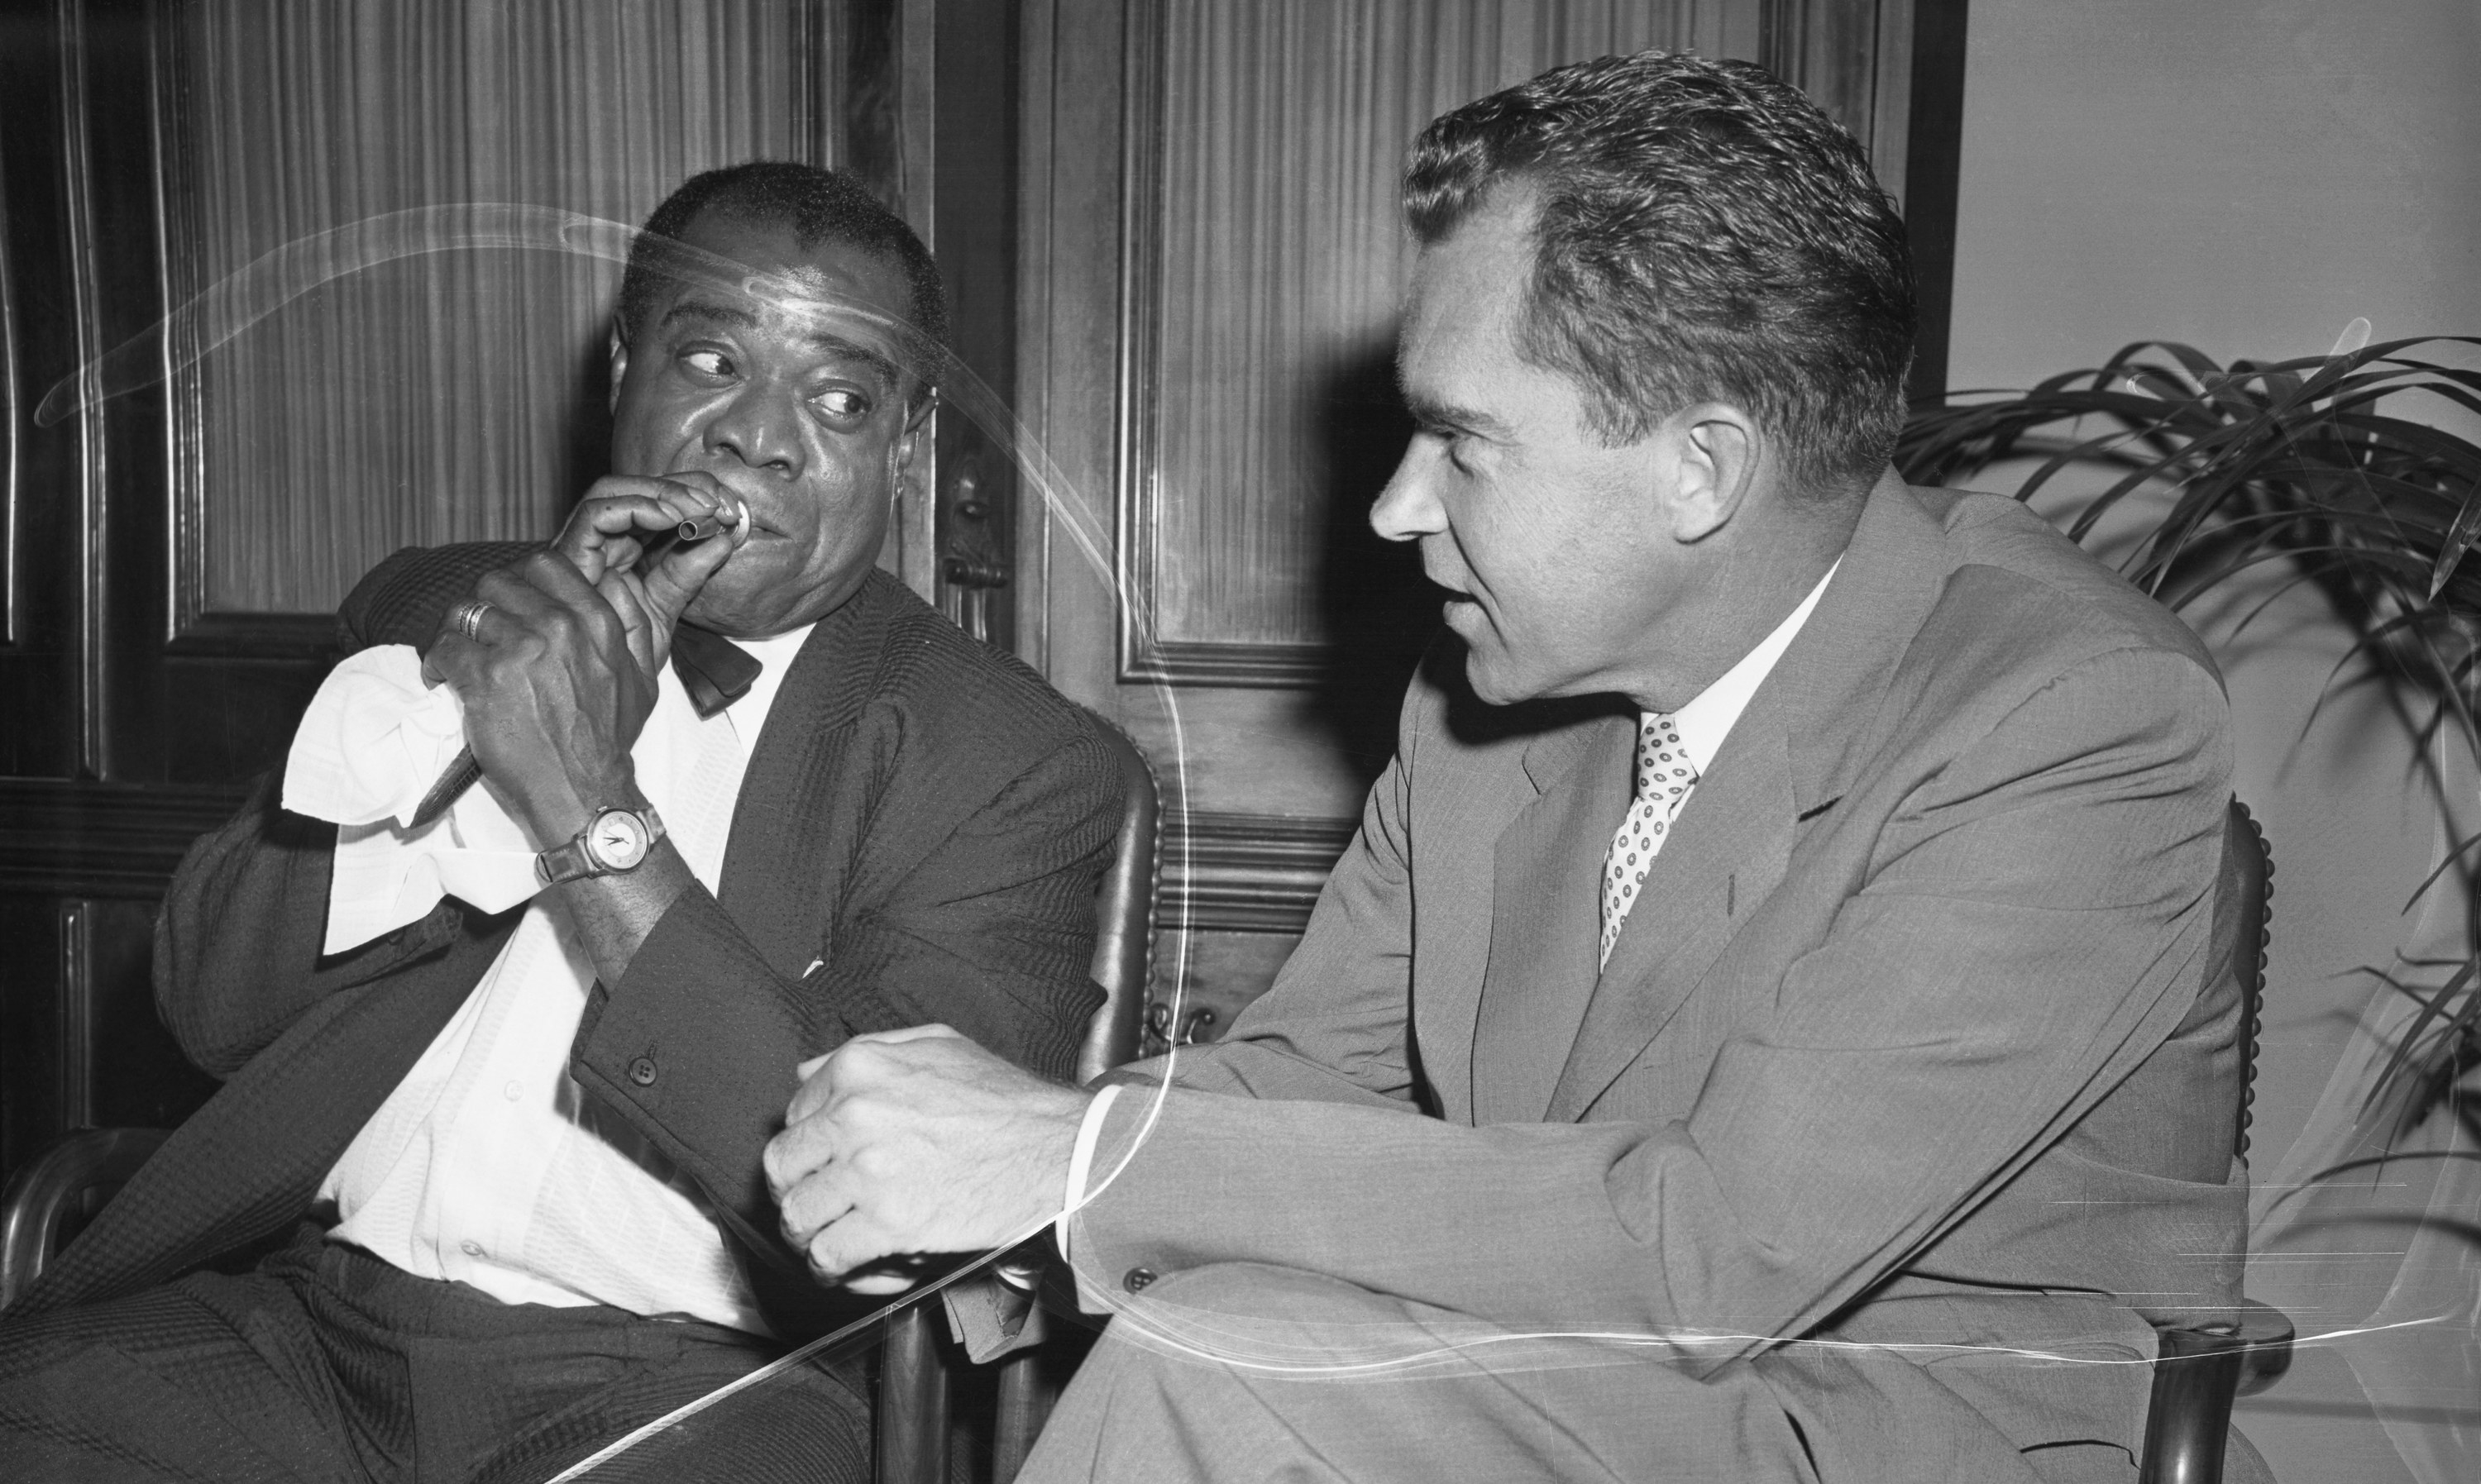 Armstrong and Nixon sitting together